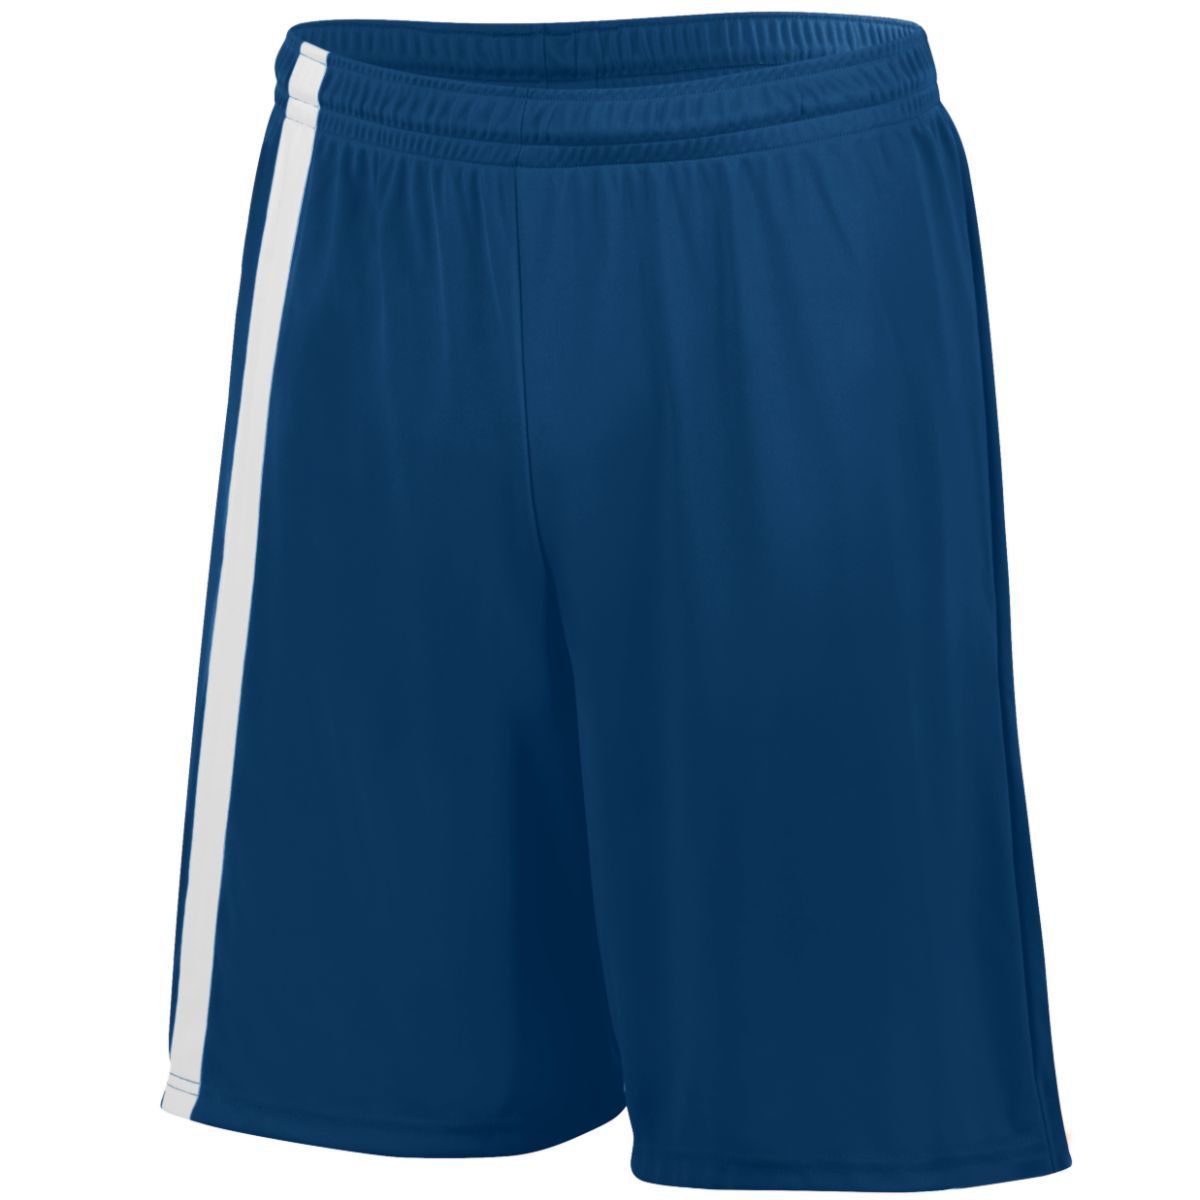 Augusta Sportswear Attacking Third Shorts in Navy/White  -Part of the Adult, Adult-Shorts, Augusta-Products, Soccer, All-Sports-1 product lines at KanaleyCreations.com